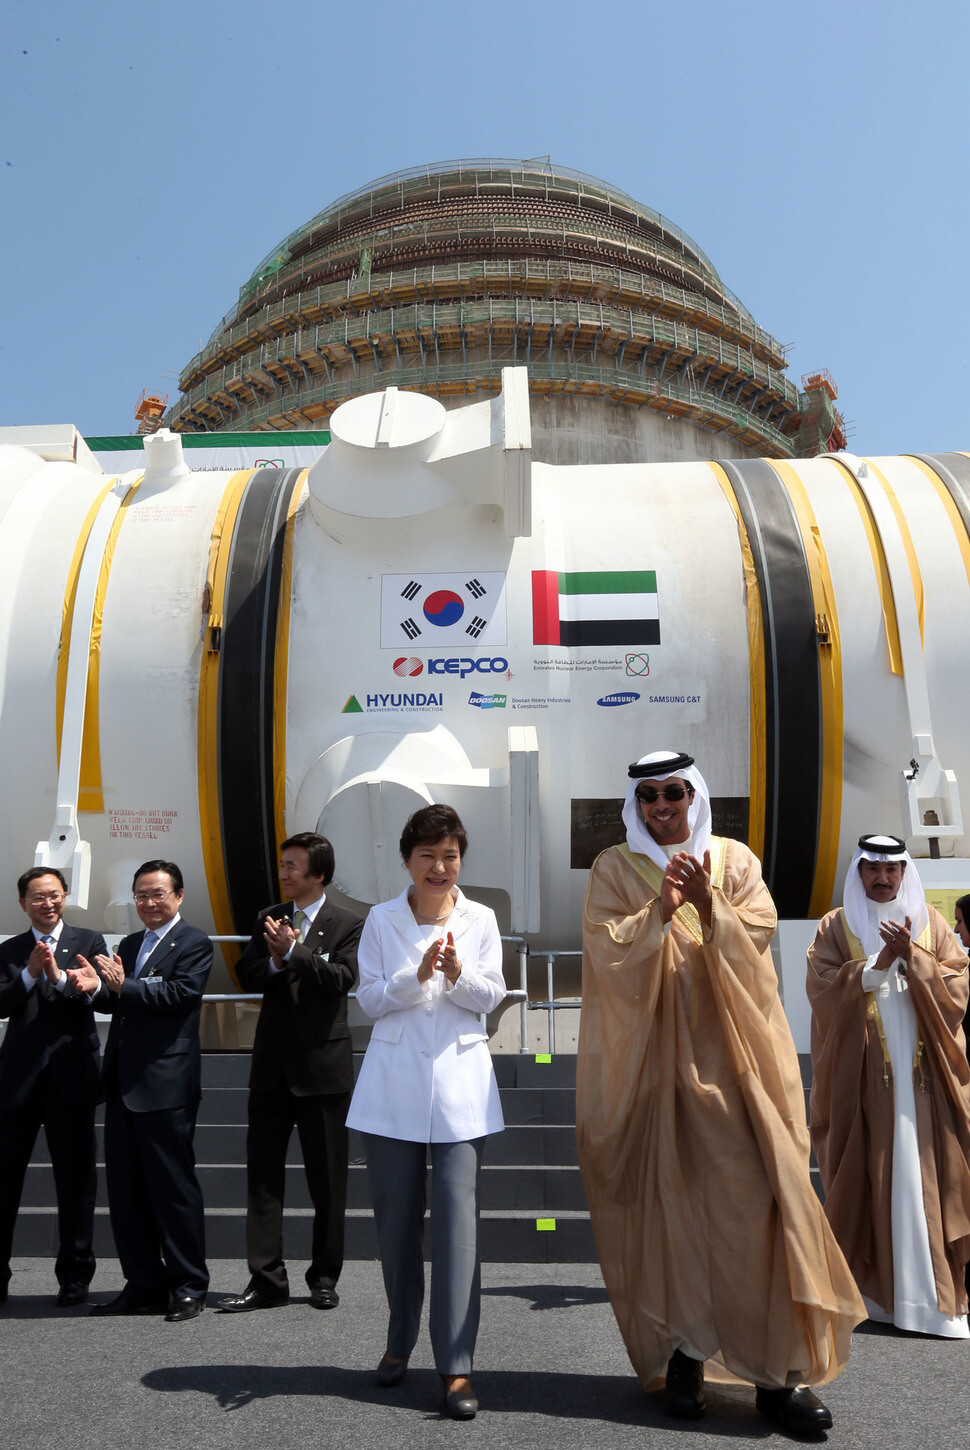 Former President Park Geun-hye applauds at a ceremony to celebrate construction of the Barakah nuclear power plant in the United Arab Emirates with Deputy Prime Minister and Minister of Presidential Affairs Sheik Mansour on May 20